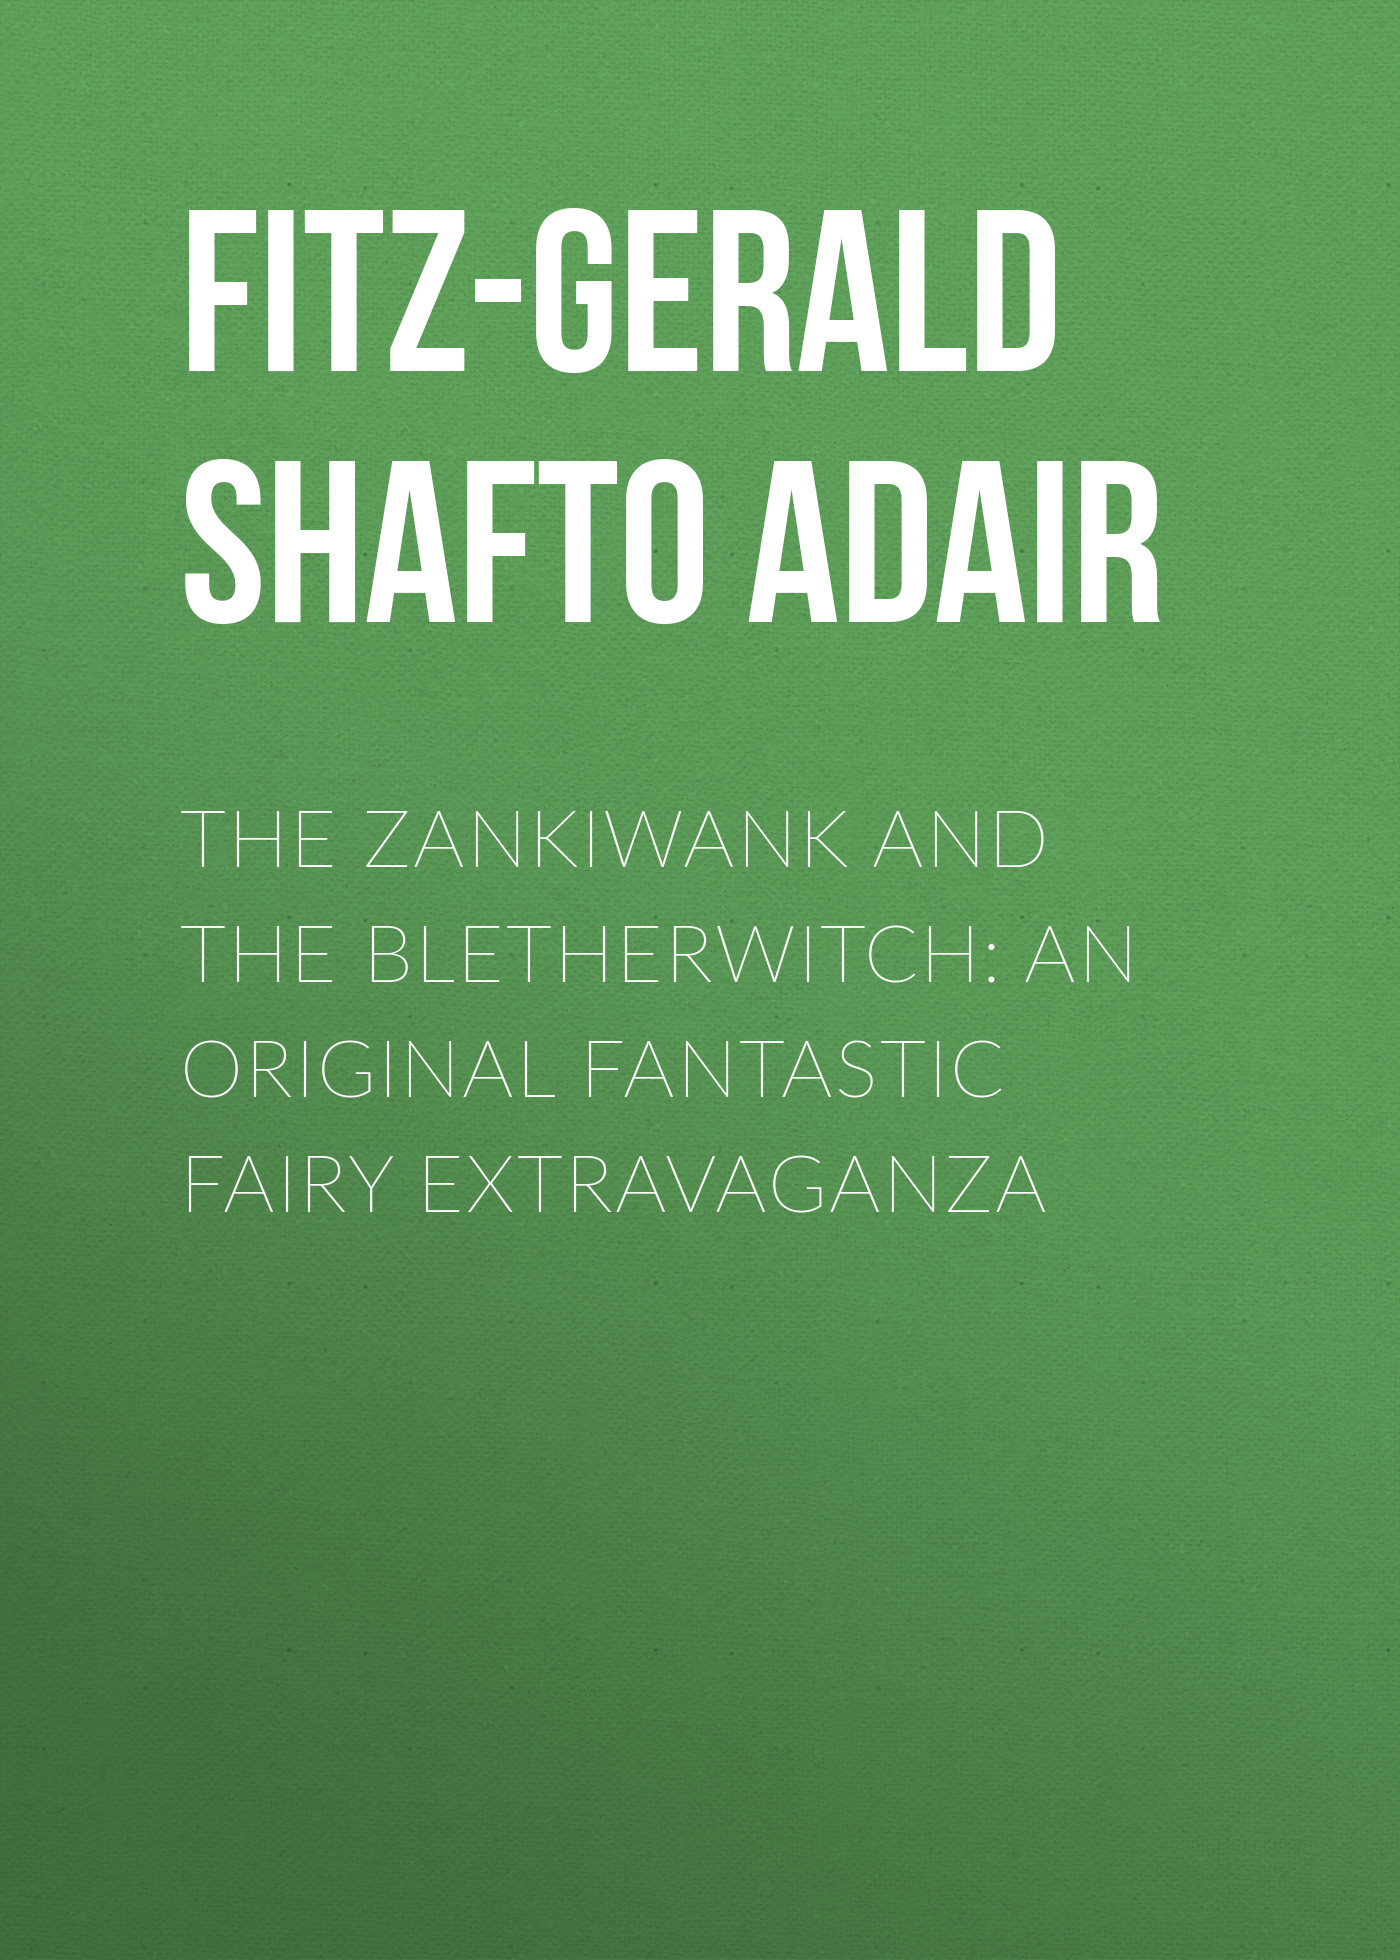 Fitz-Gerald Shafto Justin Adair The Zankiwank and The Bletherwitch: An Original Fantastic Fairy Extravaganza